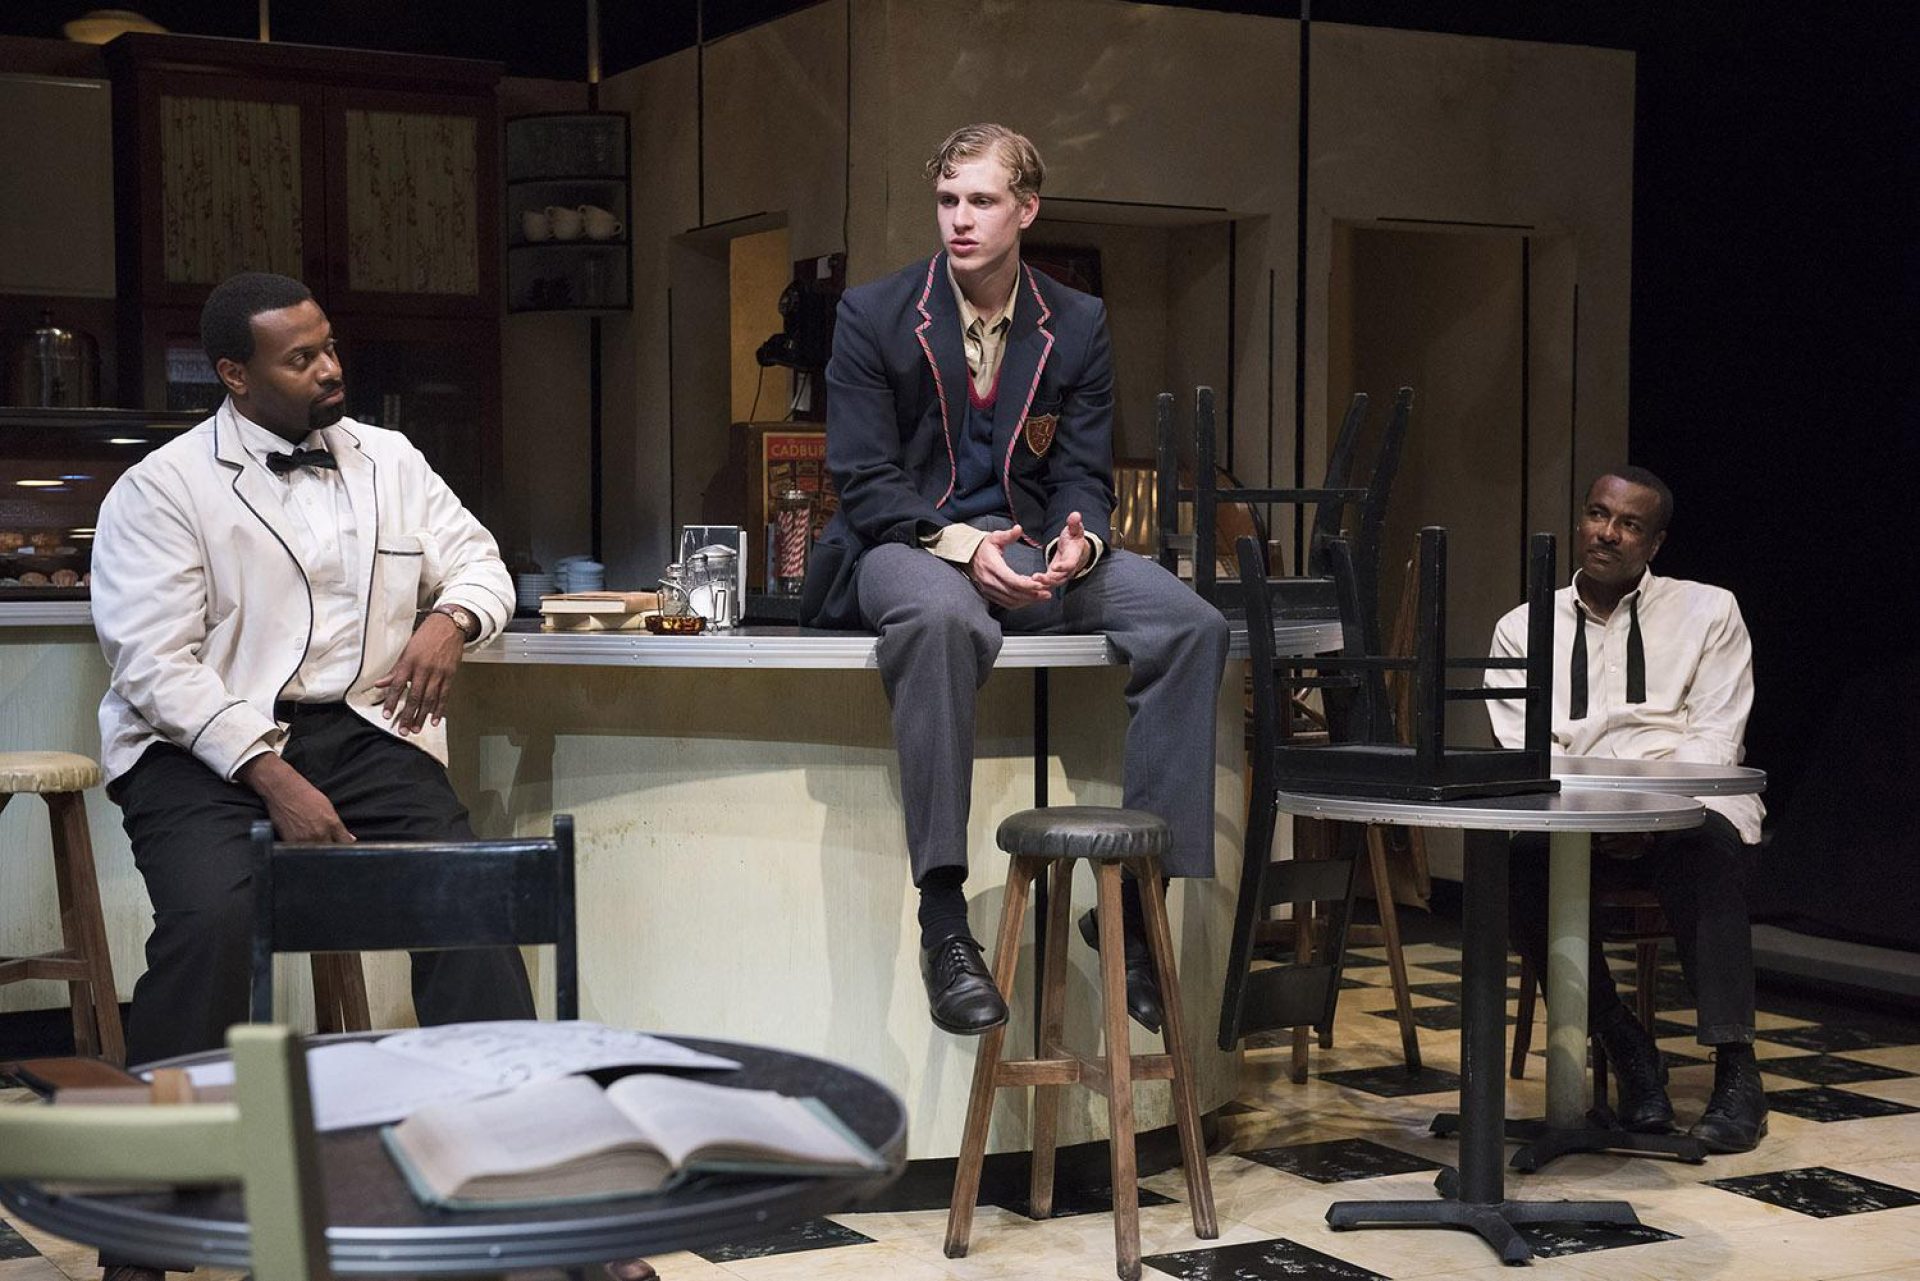 André Sills as Sam, James Daly as Hally and Allan Louis as Willie in “Master Harold” …and the Boys. Photo by David Cooper.